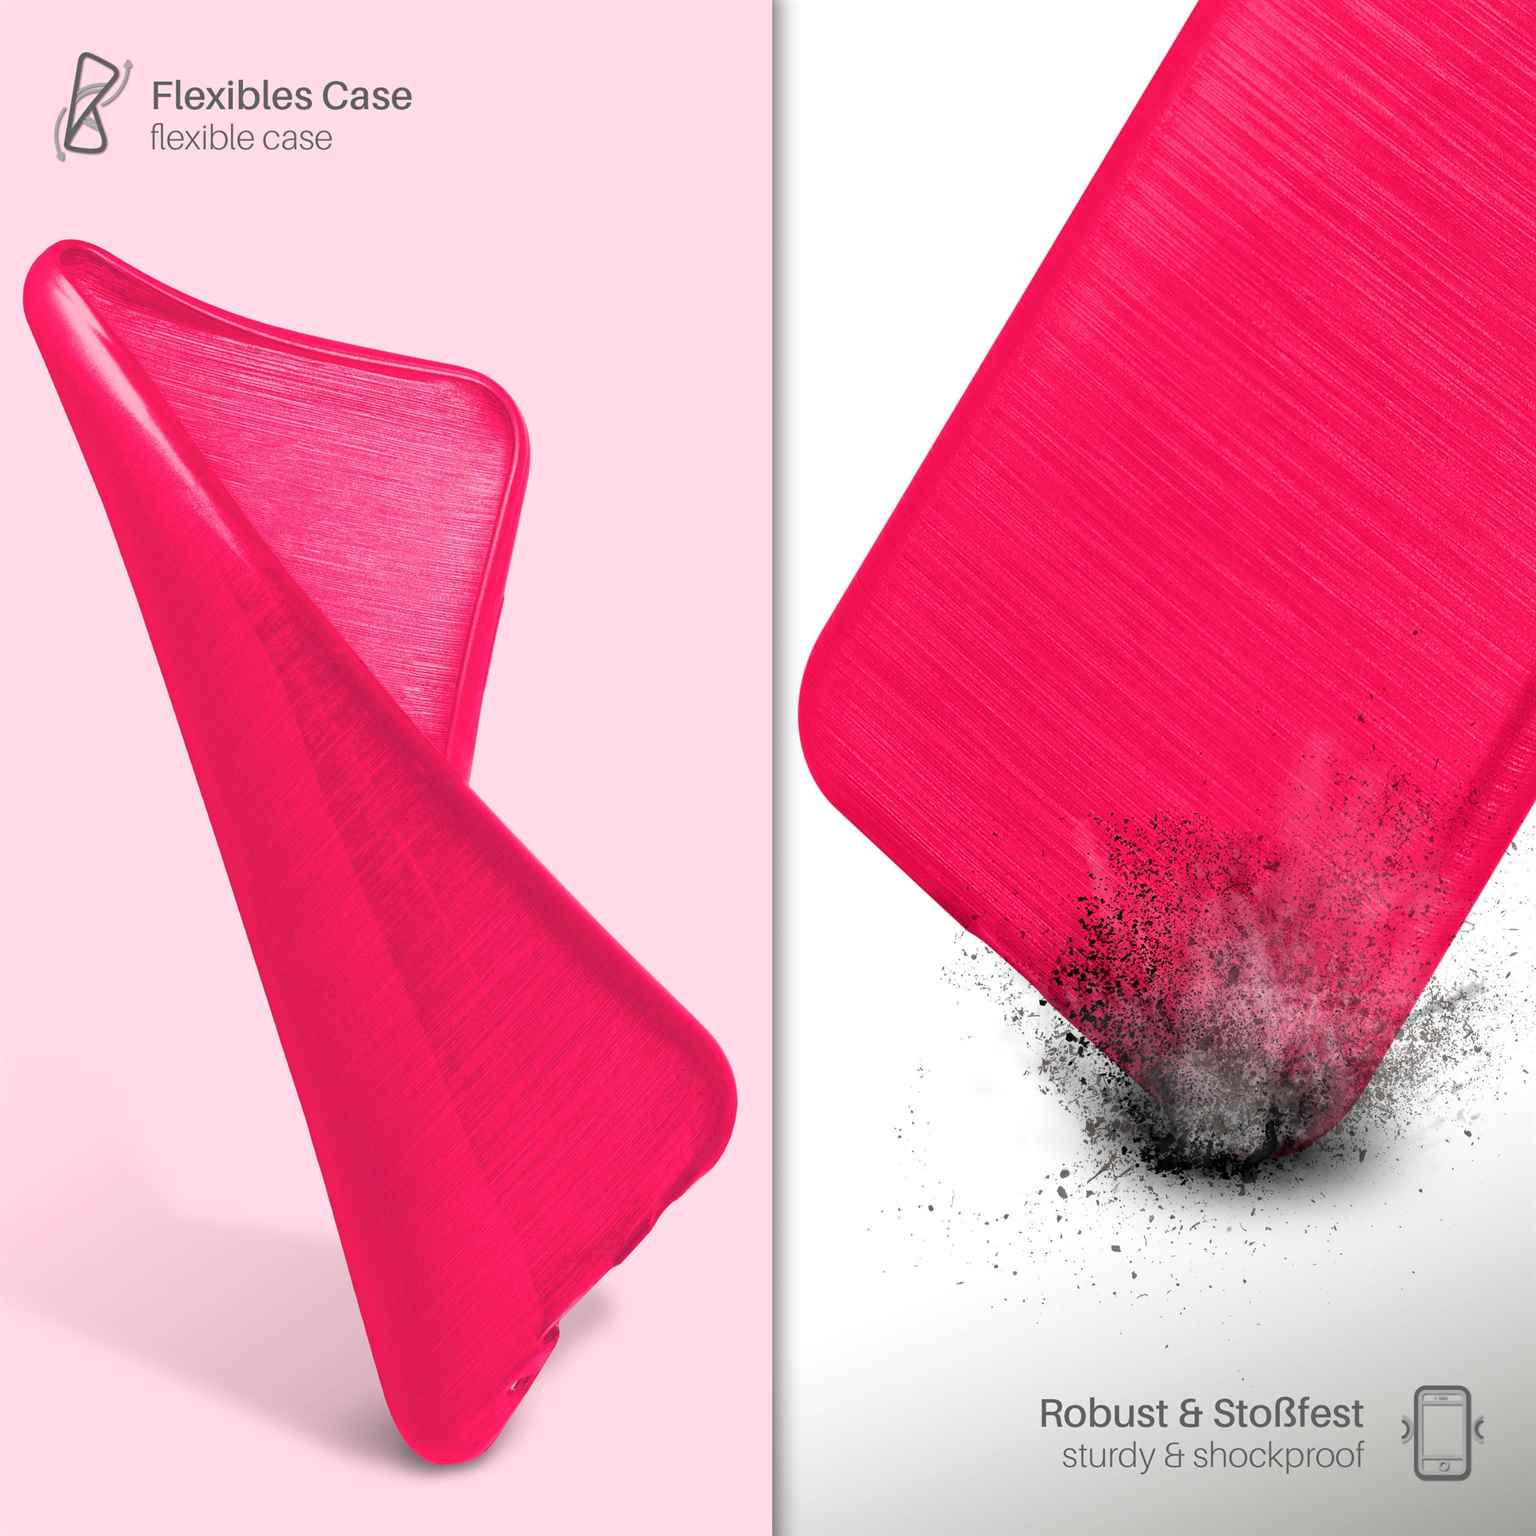 Brushed Case, One M8, HTC, MOEX Backcover, Magenta-Pink